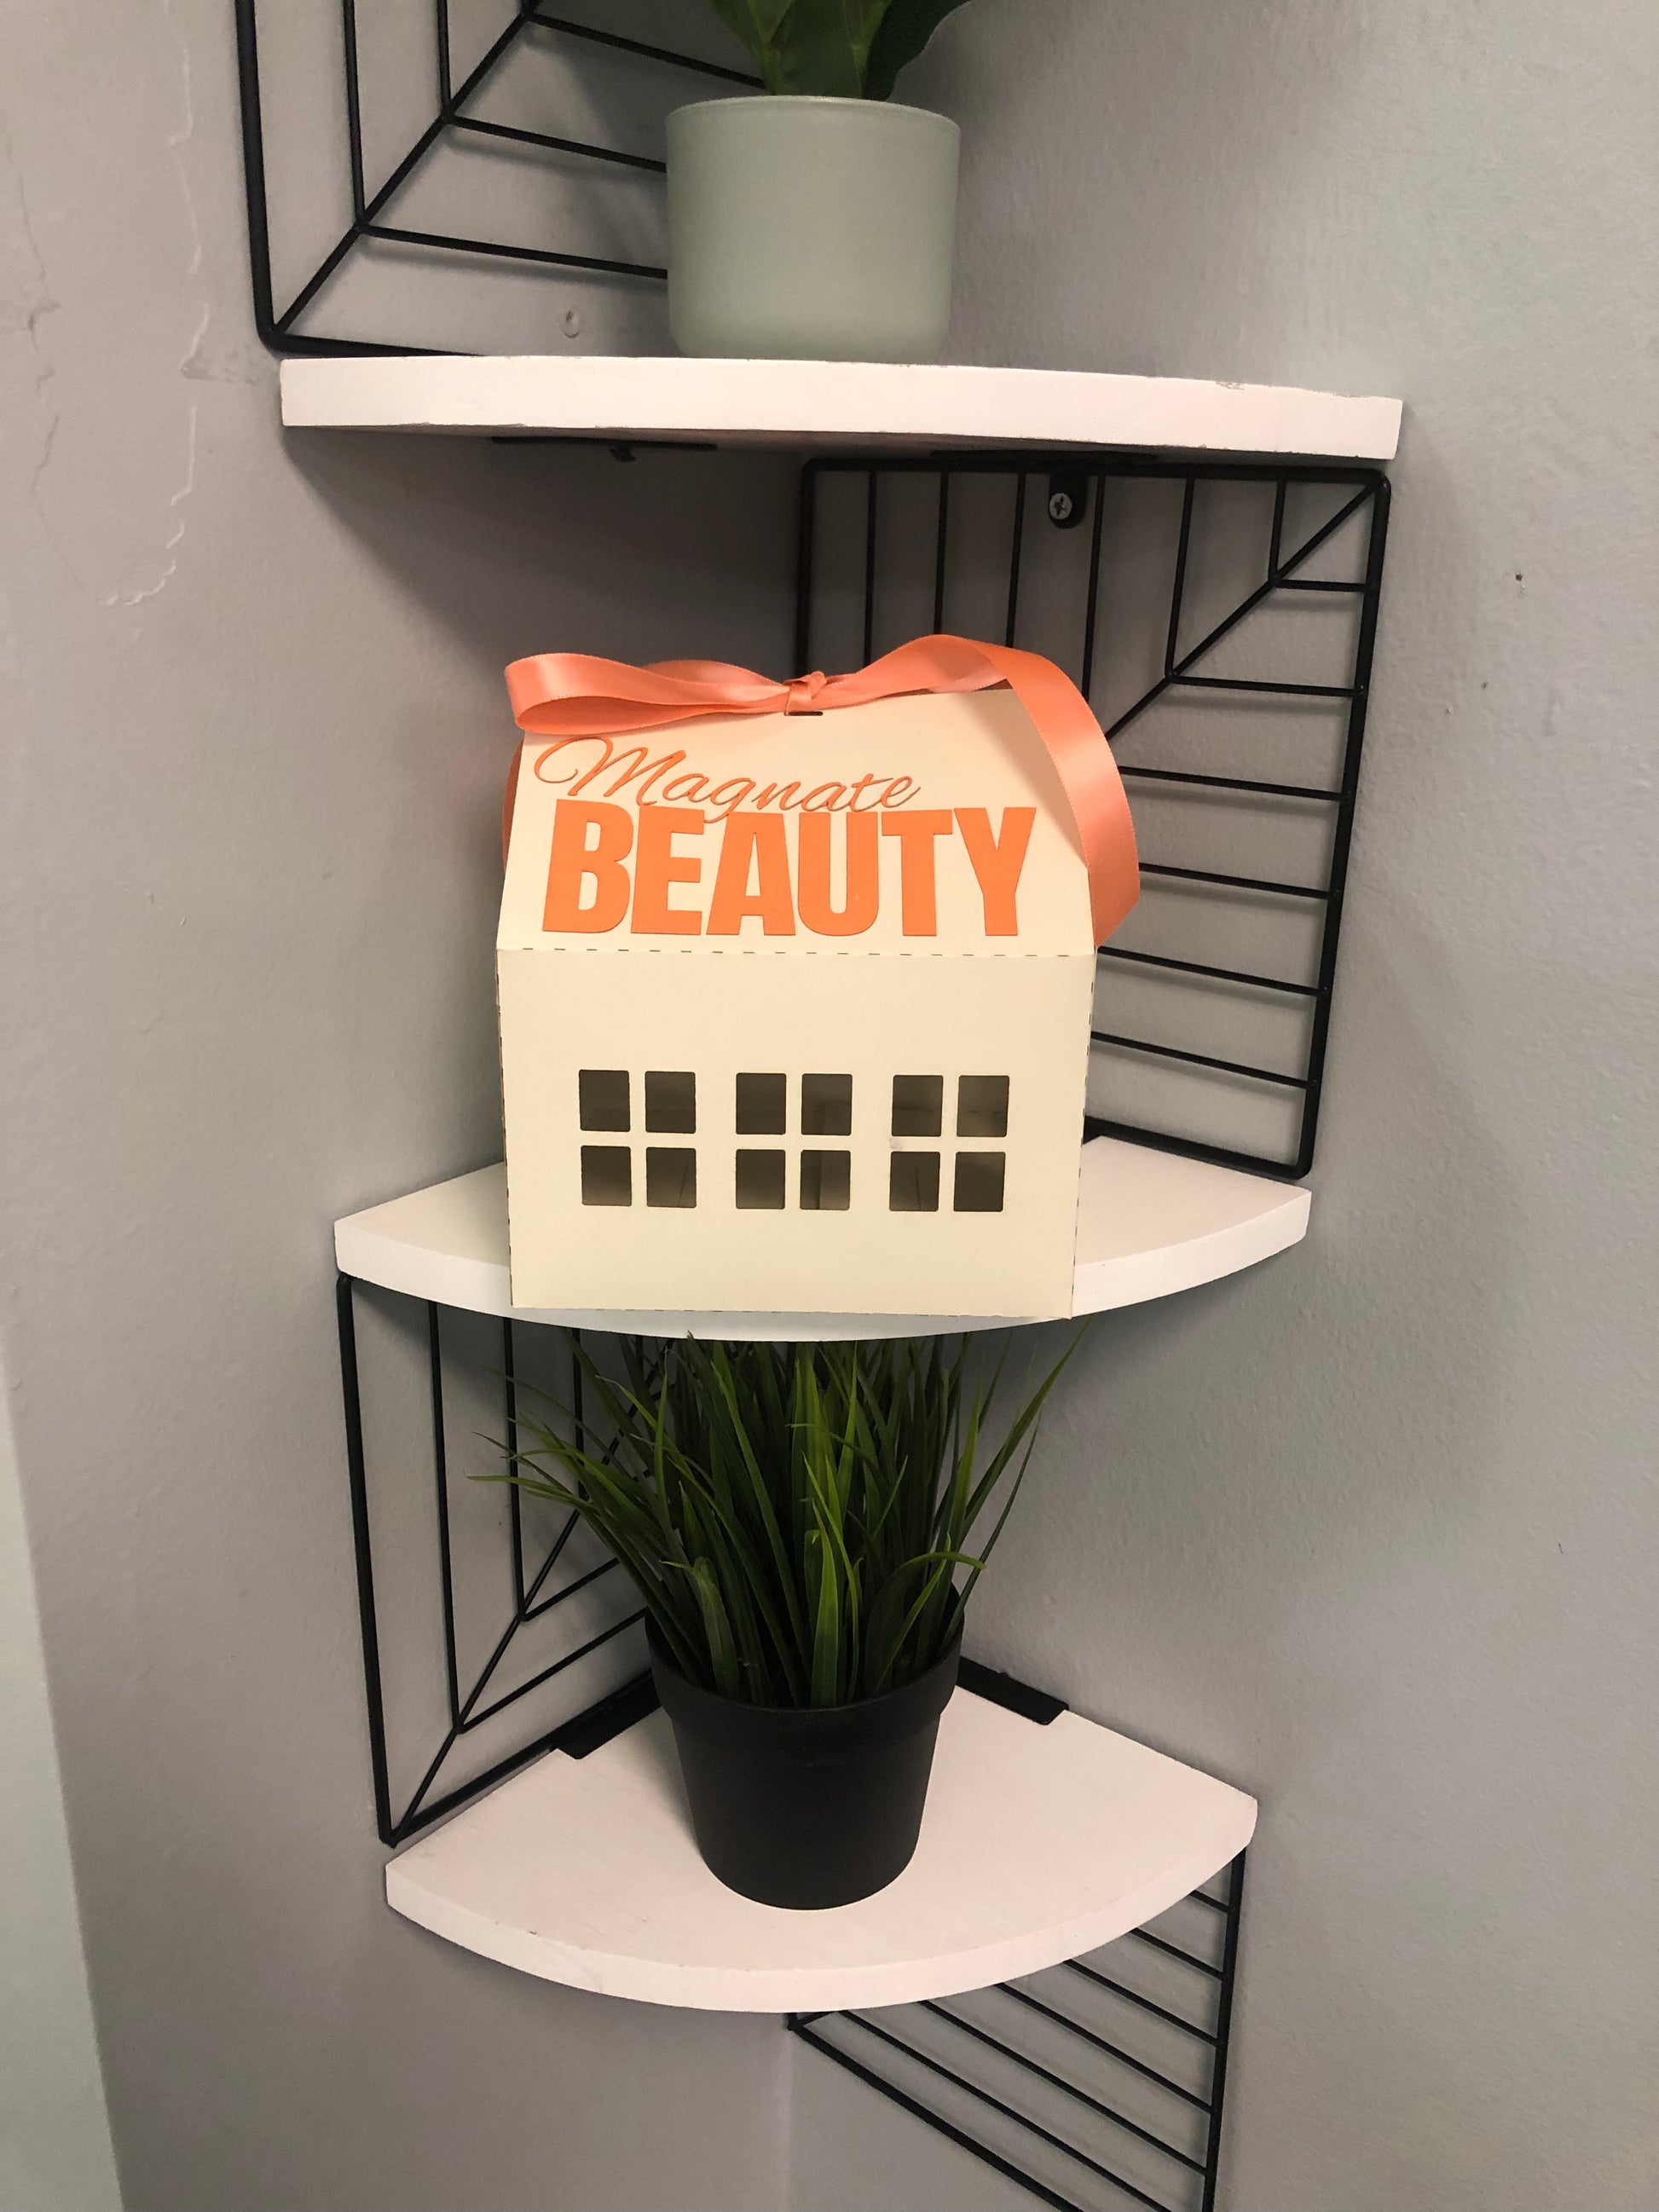 Real Estate Gift - Magnate Beauty